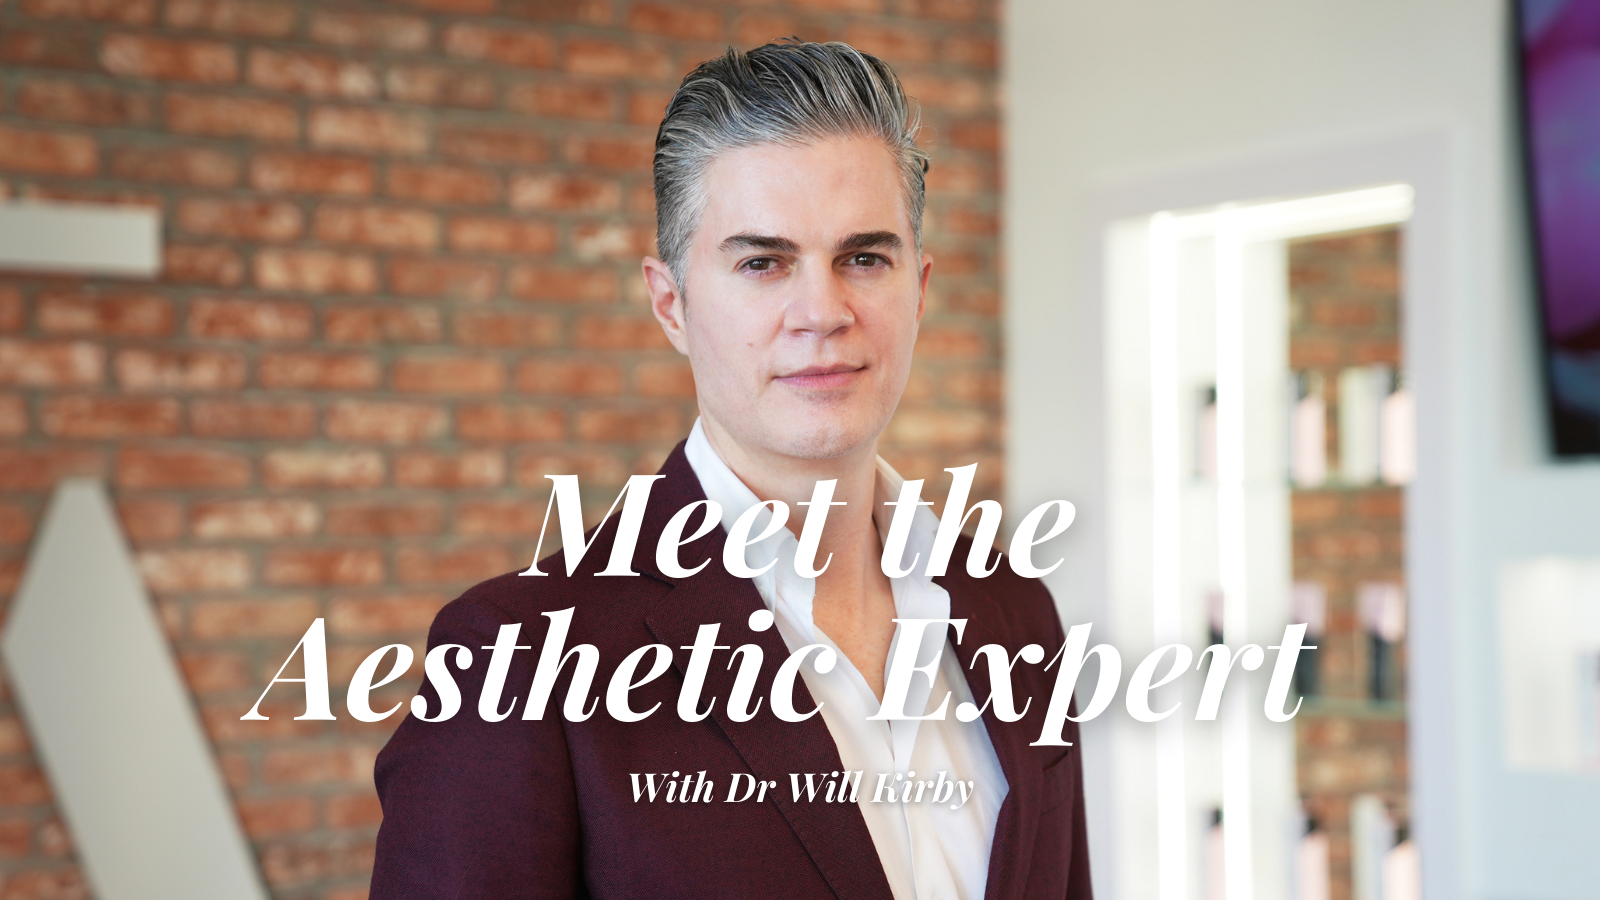 Meet the Aesthetic Expert with Dr Will Kirby: Azadeh Shirazi, MD